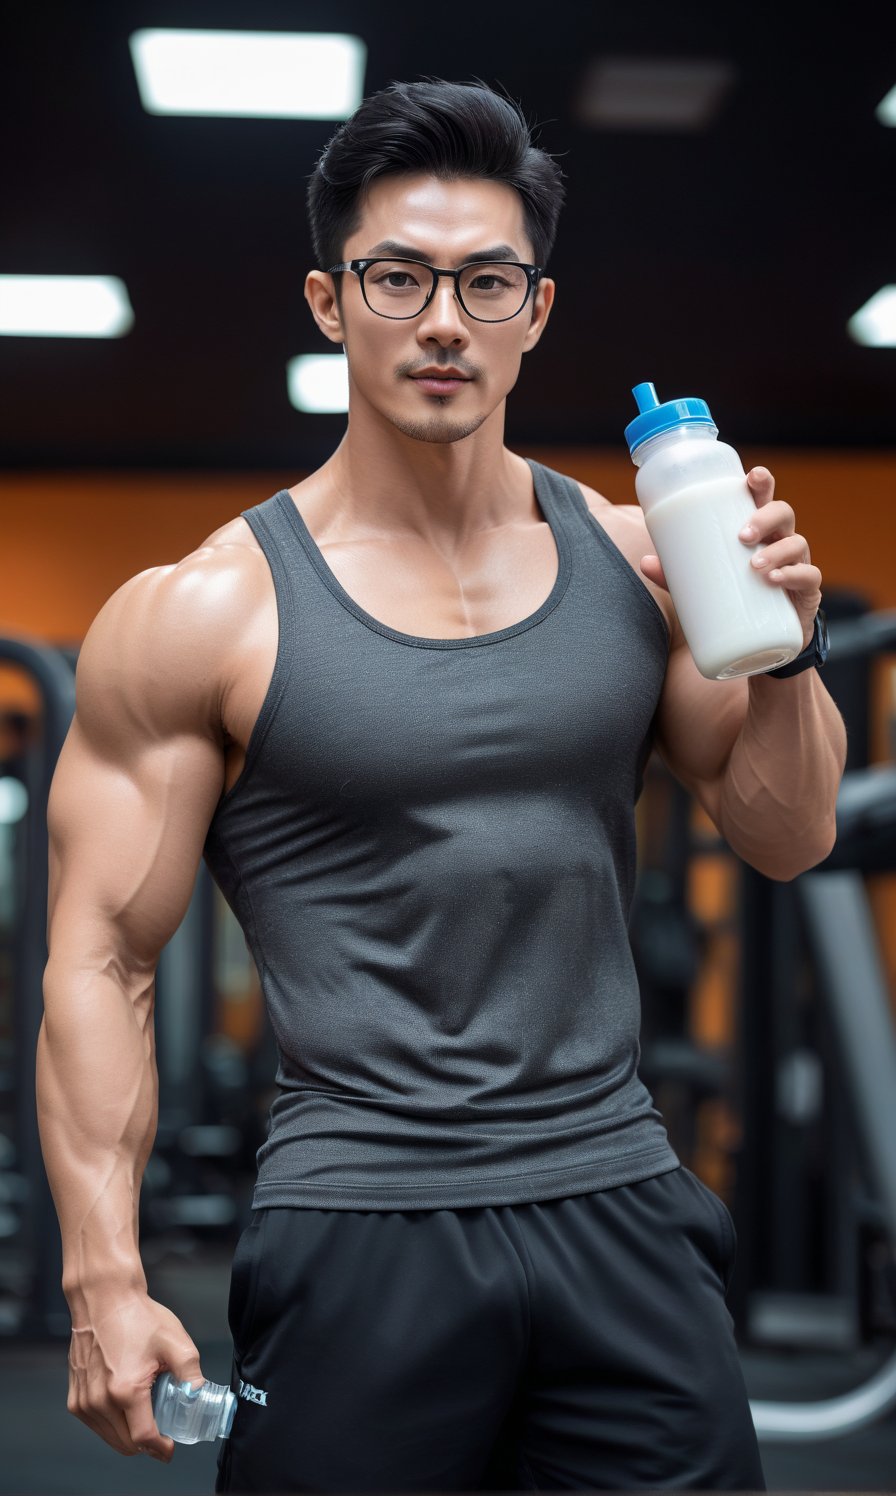 a statuesque asia man ,stands tall, his muscular physique glistening with petroleum oil that accentuates every contour,striking eyes,   glasses, lock at camera, full healthy lips , Stubble, black hair, gym_clothes, holding 
Protein shake, dynamic pose that seems to defy gravity,perfect split lighting,perfect proportions face , blurred gym backdrop, perfect proportions  